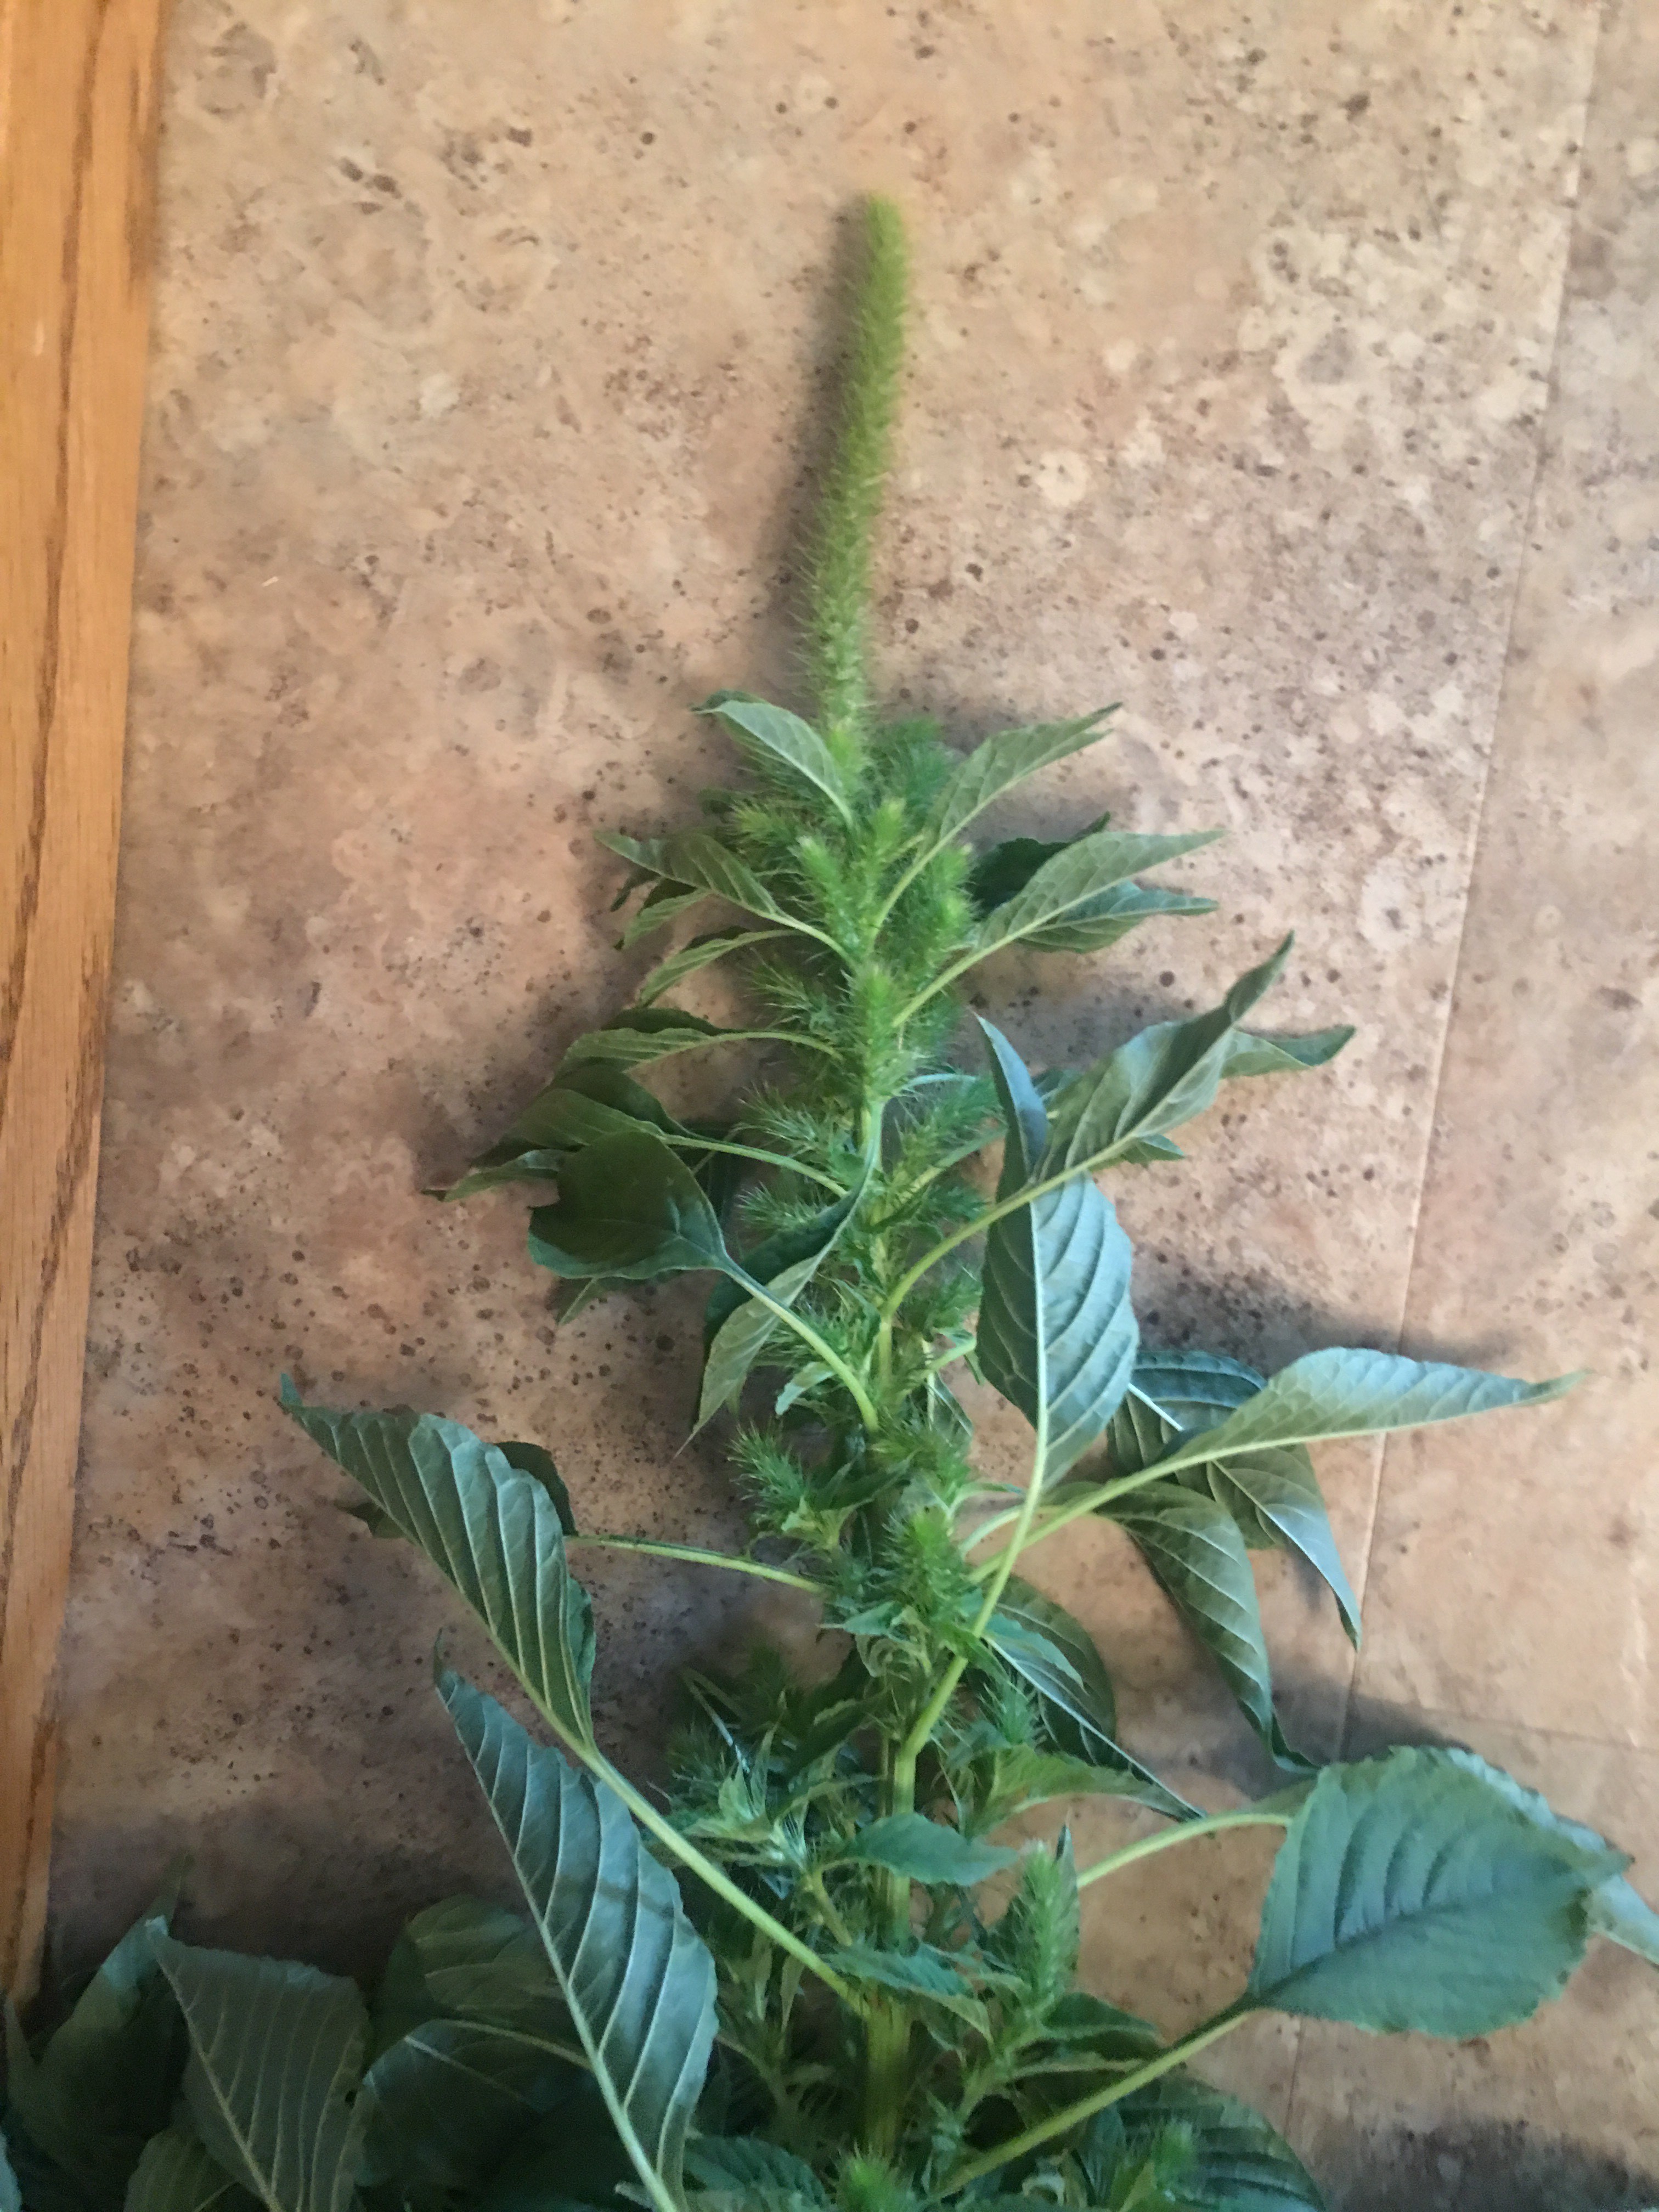 This Palmer amaranth plant was the first one found in North Dakota. (Photo courtesy of Bruce Kusler, farmer and Pioneer seed salesman)